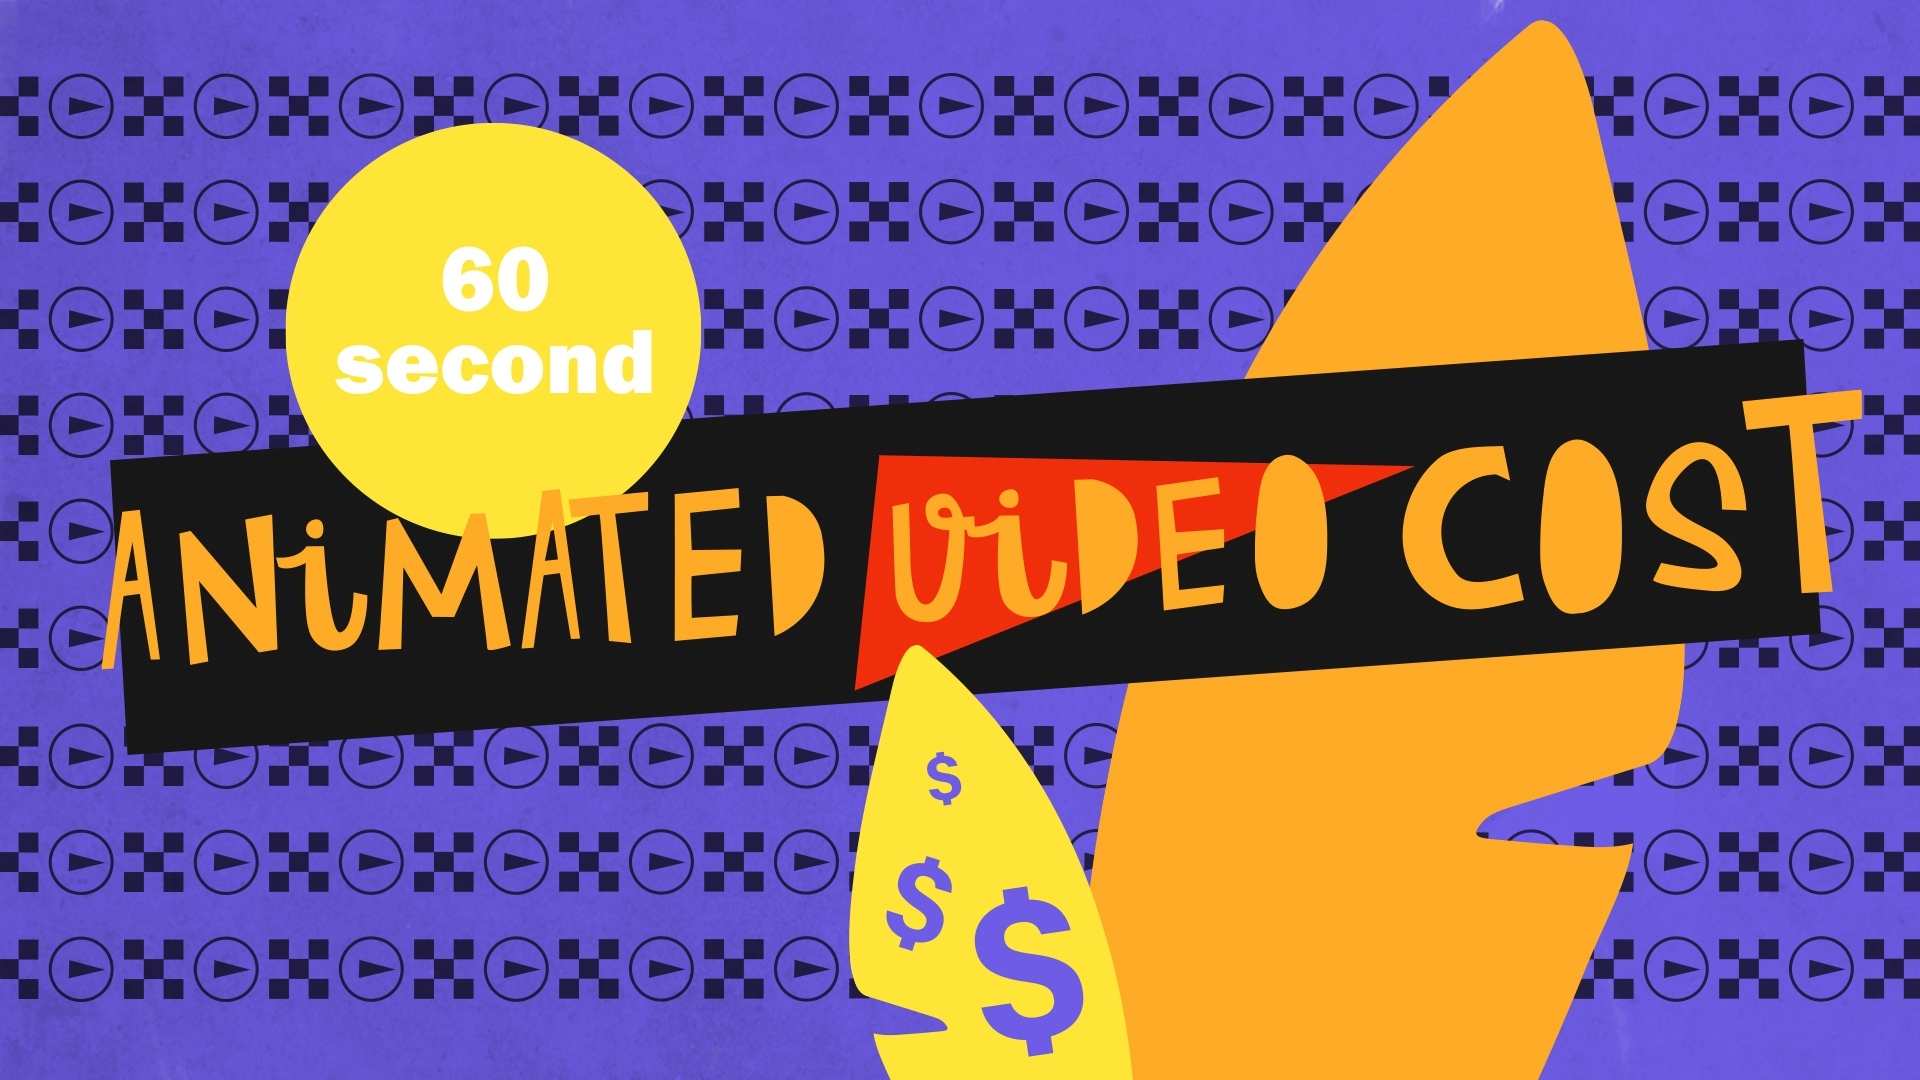 Animated video cost